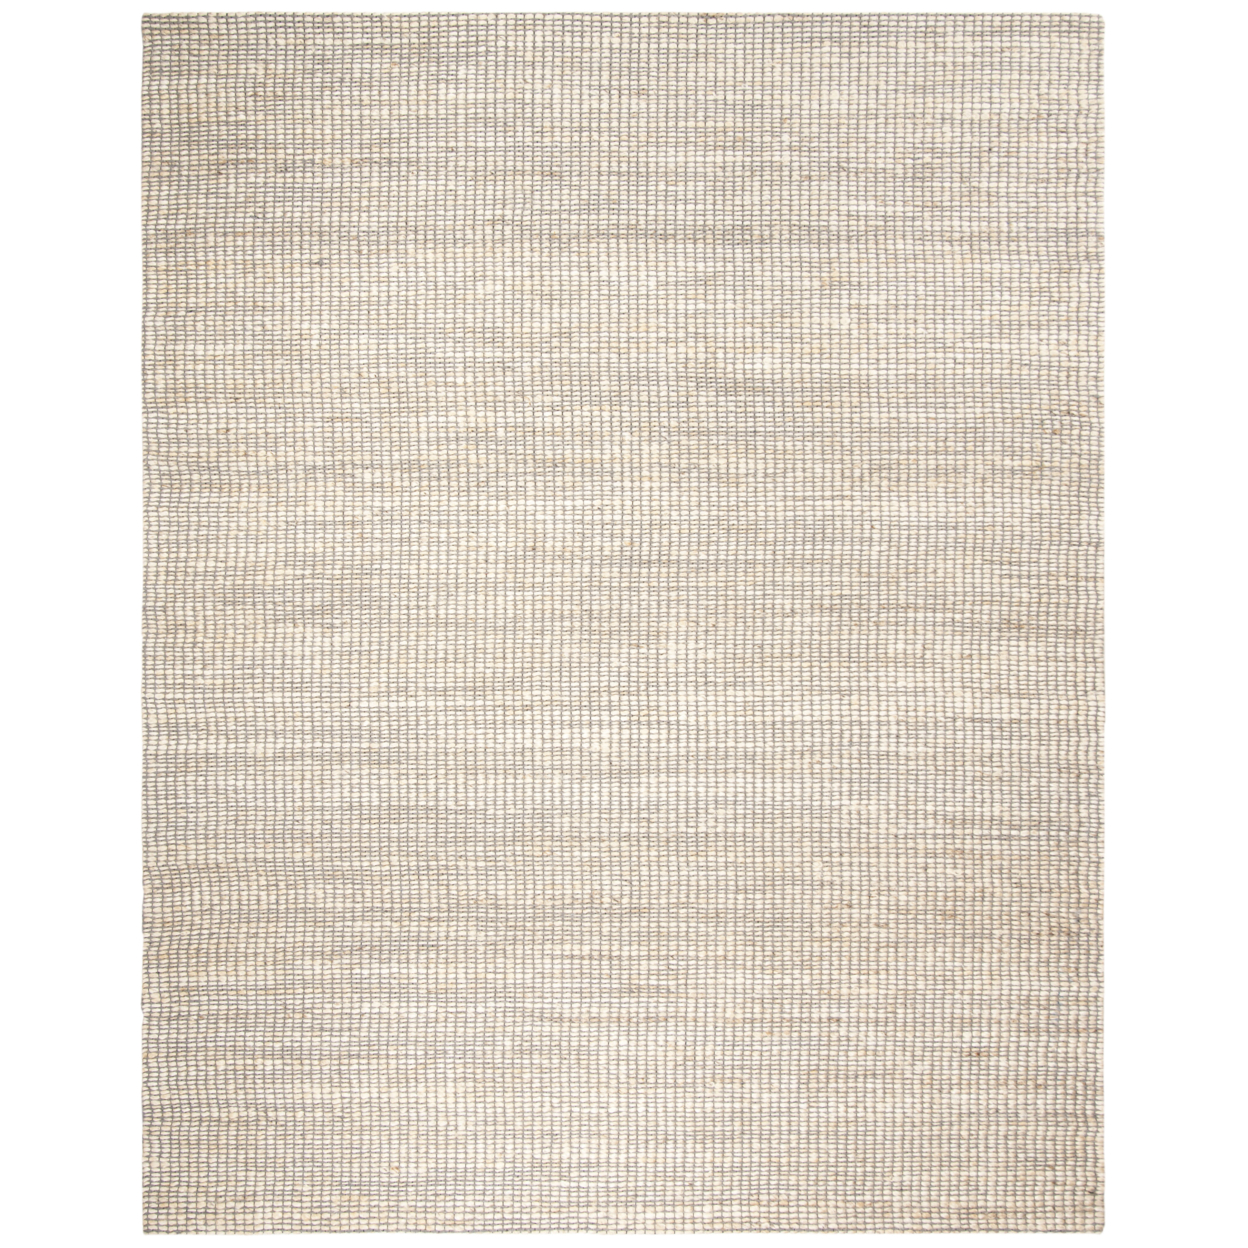 SAFAVIEH Marbella Collection MRB303A Braided Ivory Rug - 6' Square